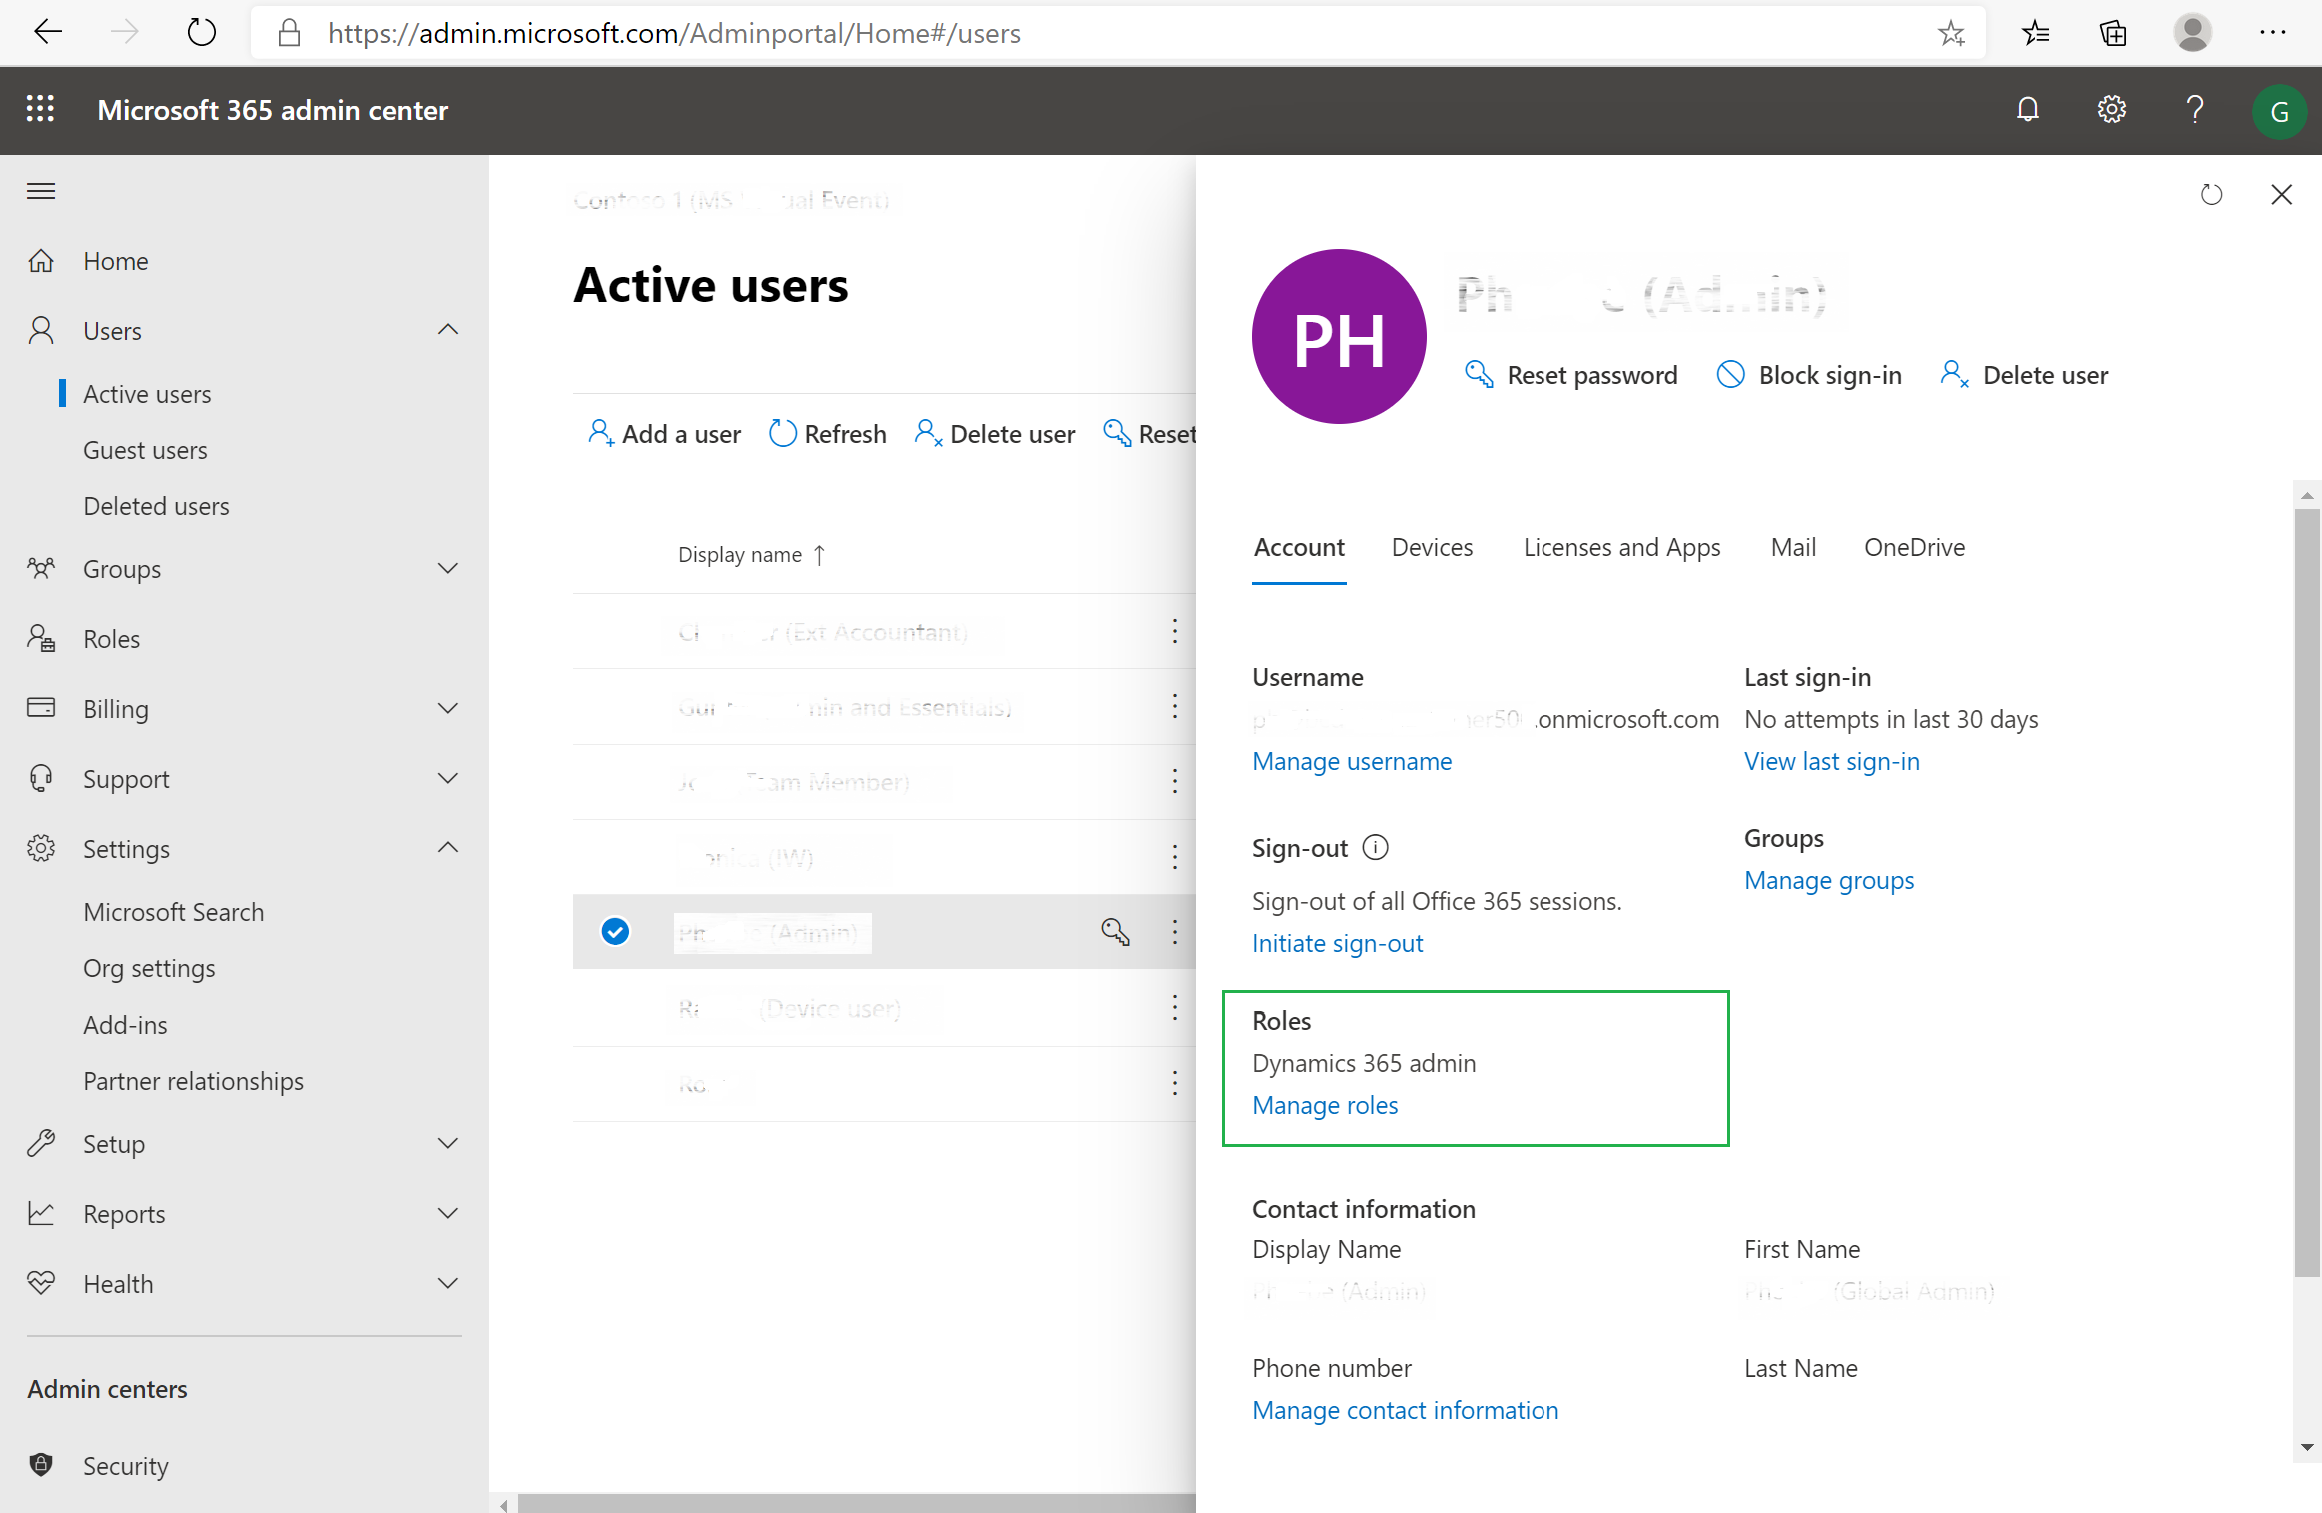 Dynamics 365 admin and helpdesk admin roles for accessing Business Central admin center